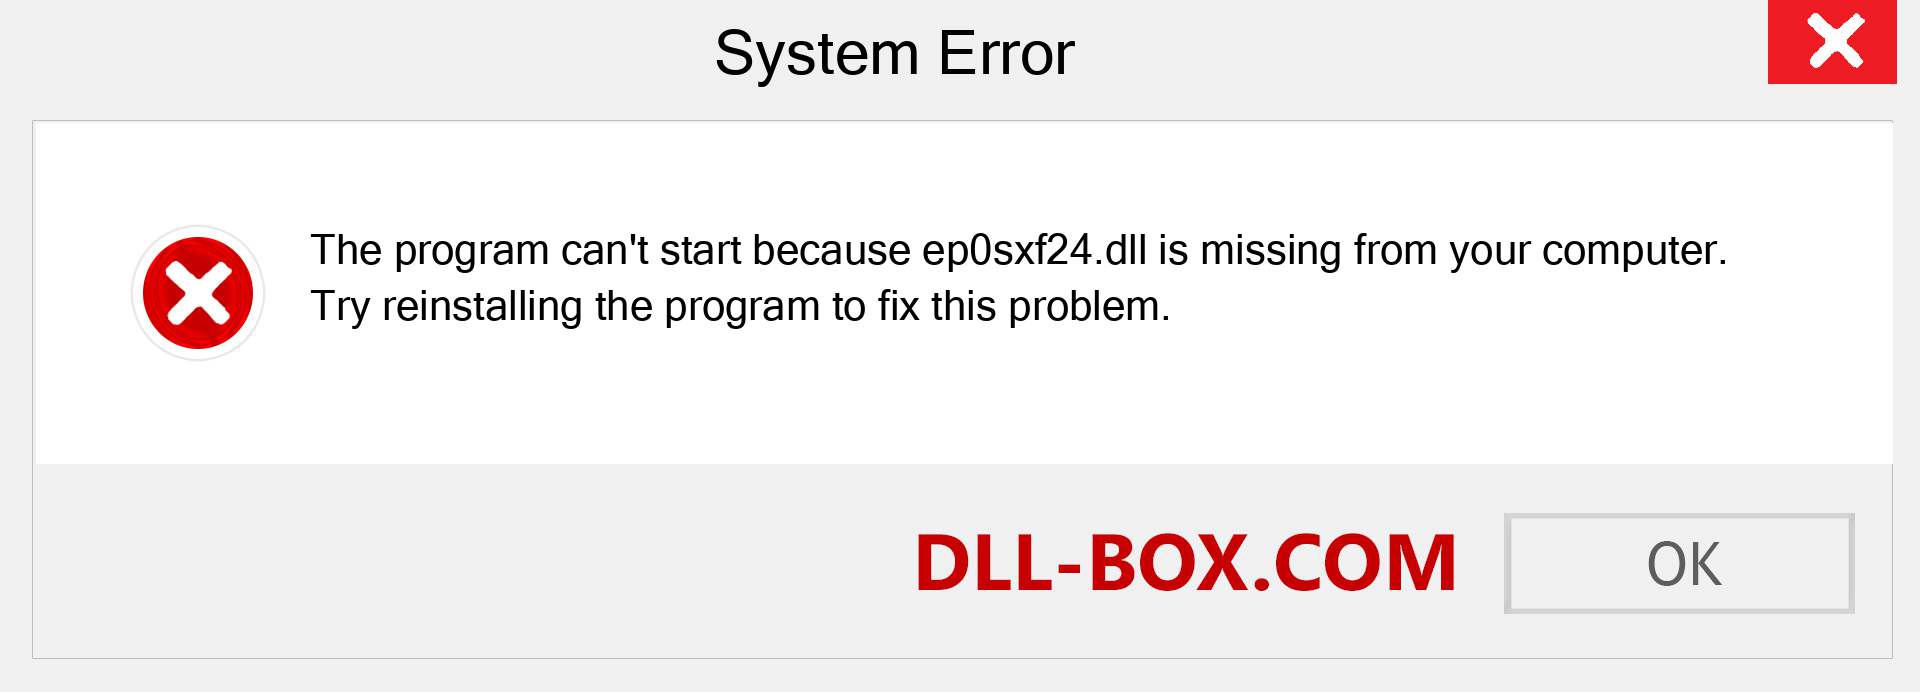  ep0sxf24.dll file is missing?. Download for Windows 7, 8, 10 - Fix  ep0sxf24 dll Missing Error on Windows, photos, images